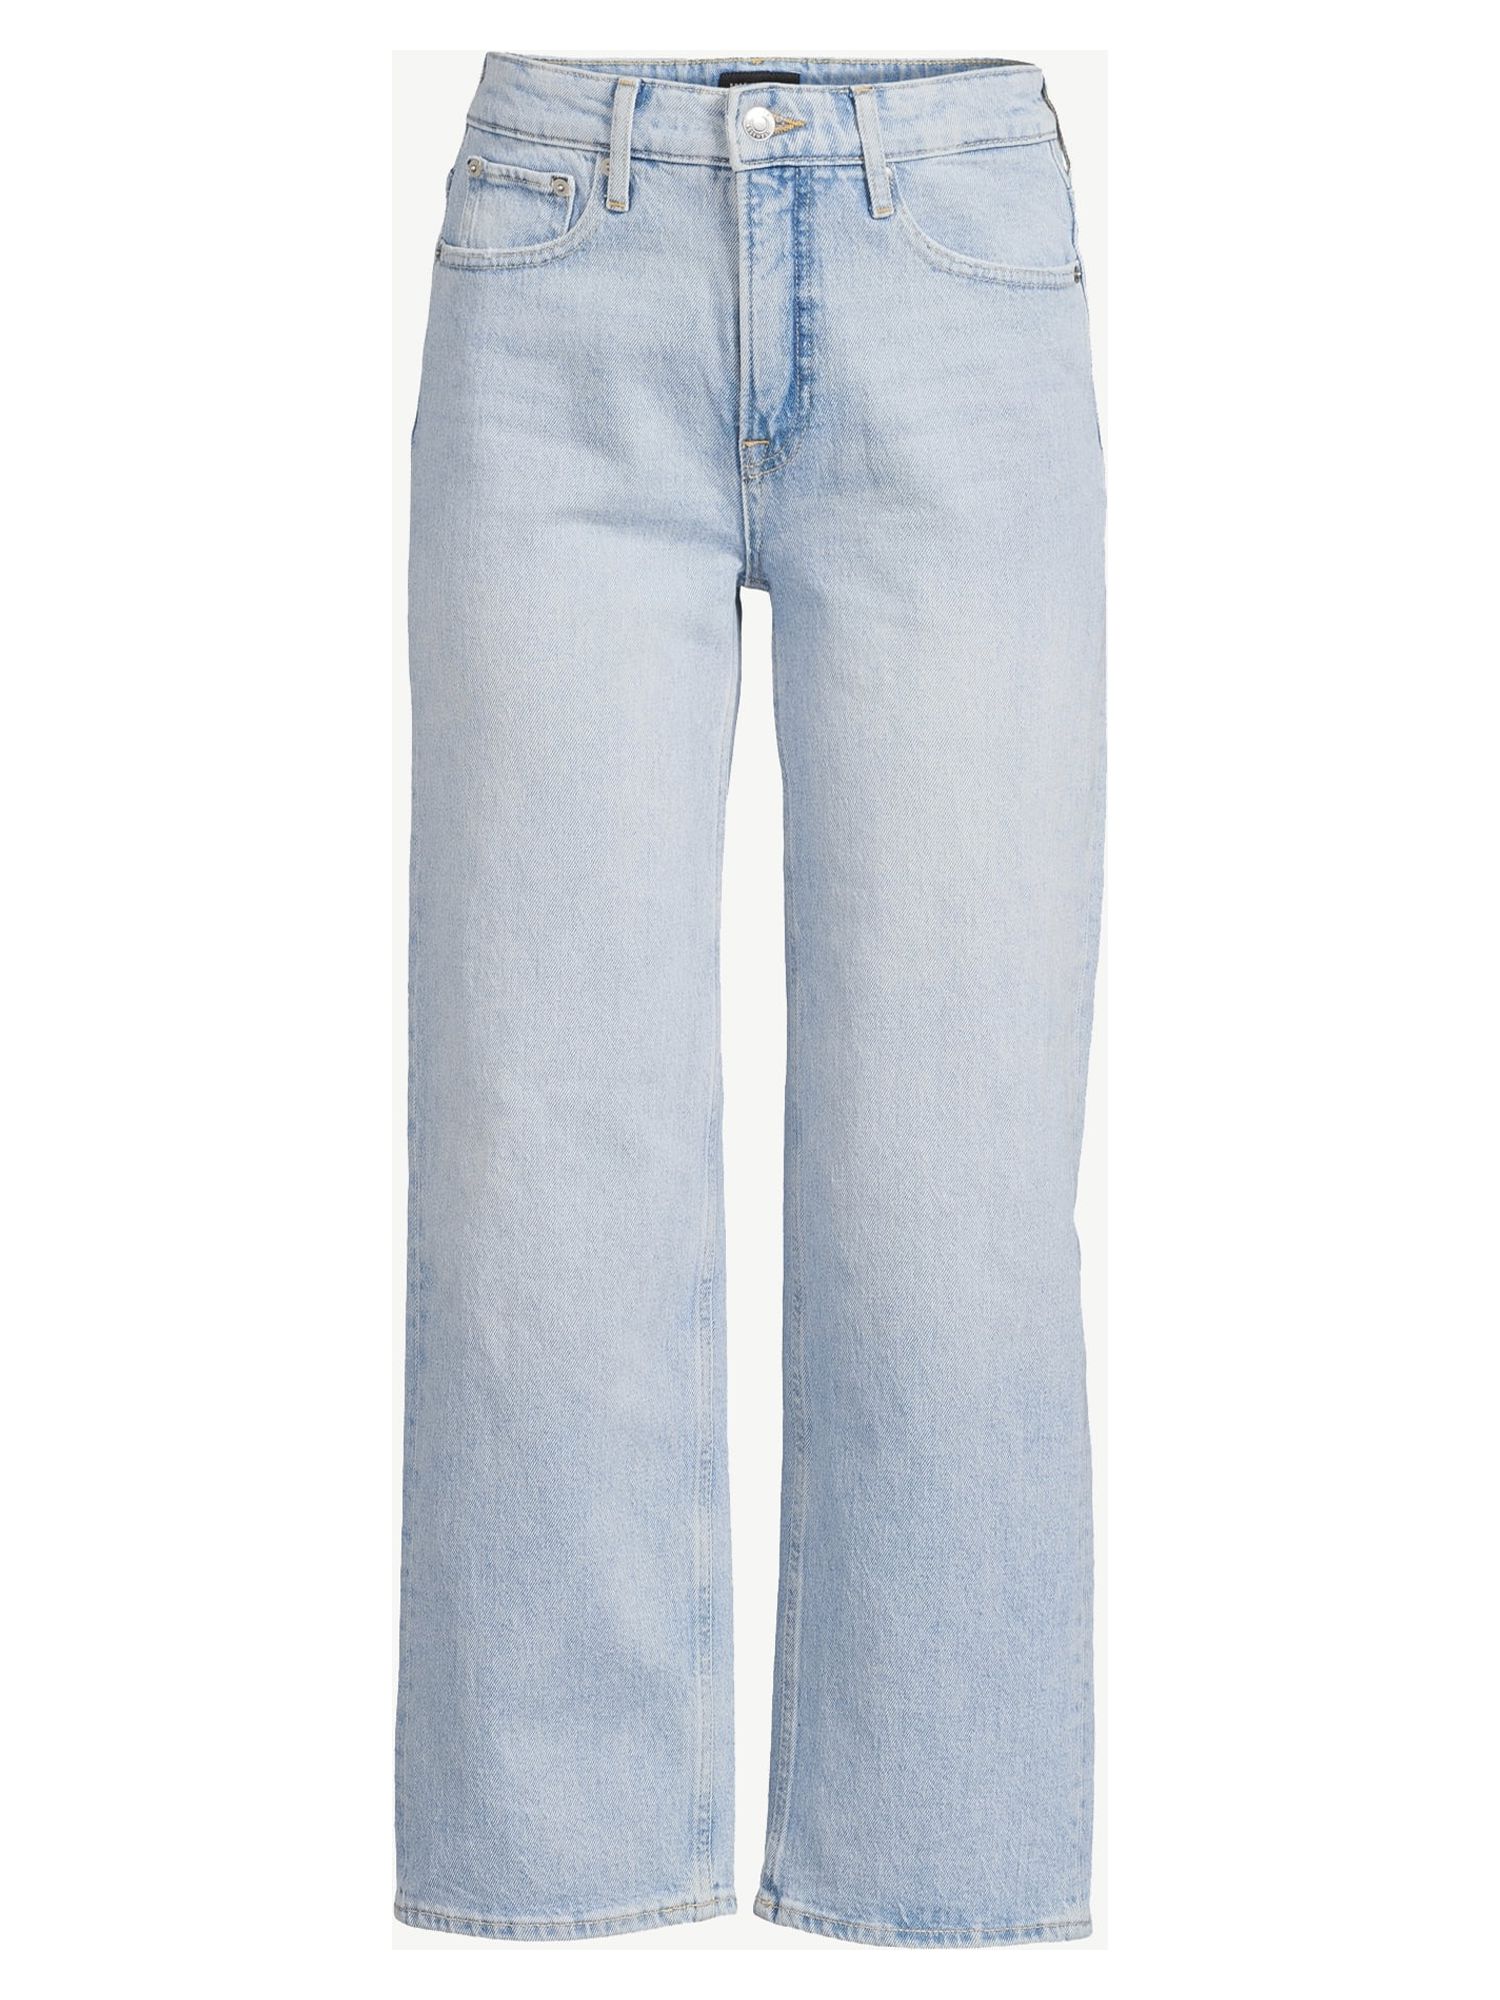 Free Assembly Women's Super High Rise Crop Wide Straight Jean - image 2 of 6